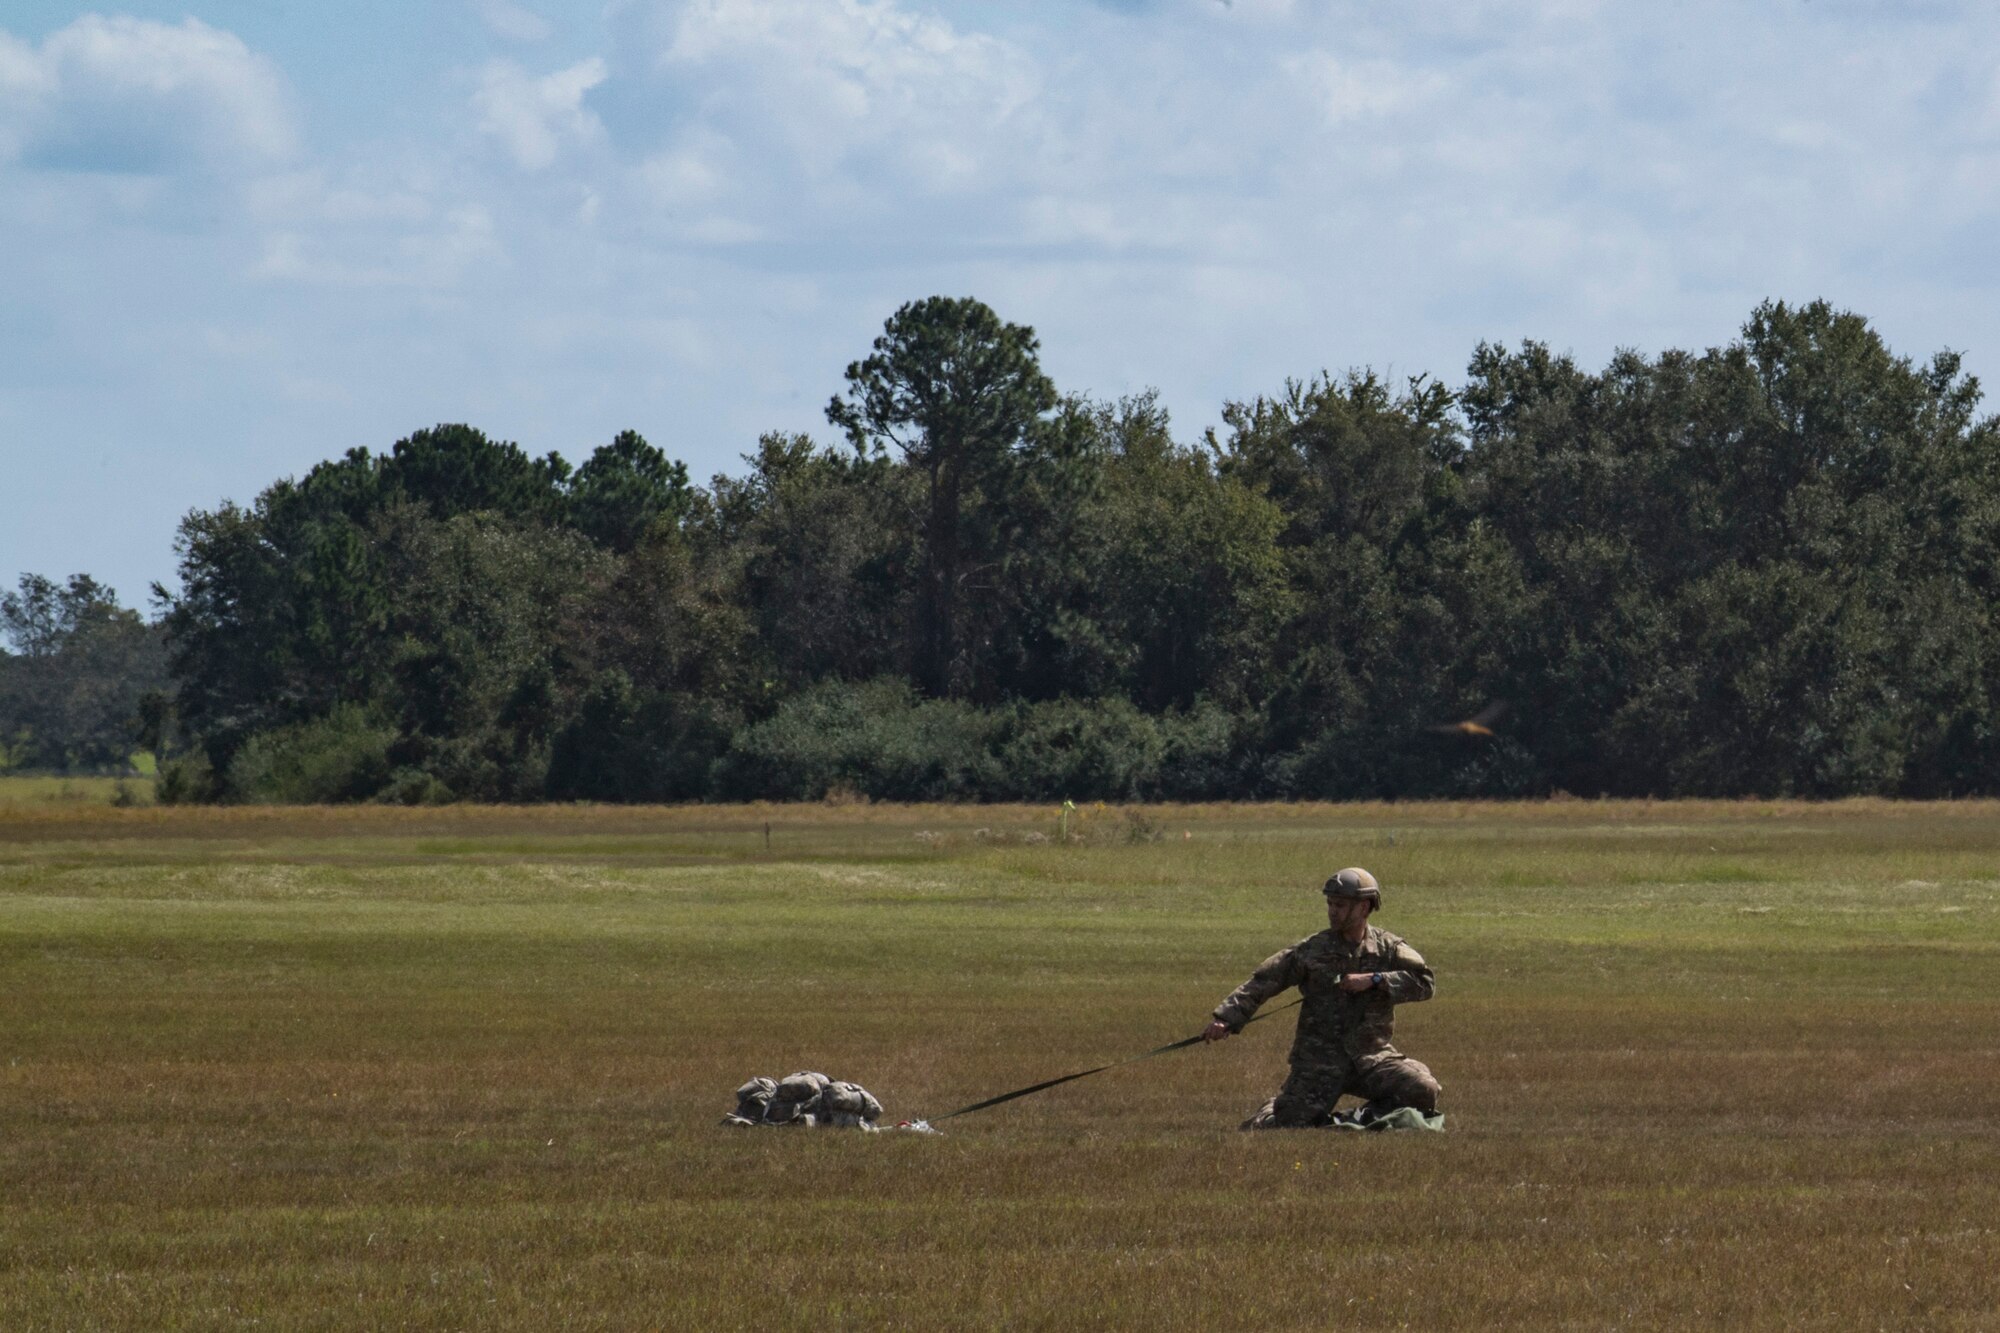 Tech. Sgt. Vanloon, 820th Combat Operations Squadron NCO in charge of individual combat equipment, gathers a MC-6 parachute after a static-line jump, Oct. 3, 2017, at the Lee Fulp drop zone in Tifton, Ga. During a static-line jump, the jumper is attached to the aircraft via the ‘static-line’, which automatically deploys the jumpers’ parachute after they’ve exited the aircraft. (U.S. Air Force photo by Airman 1st Class Daniel Snider)